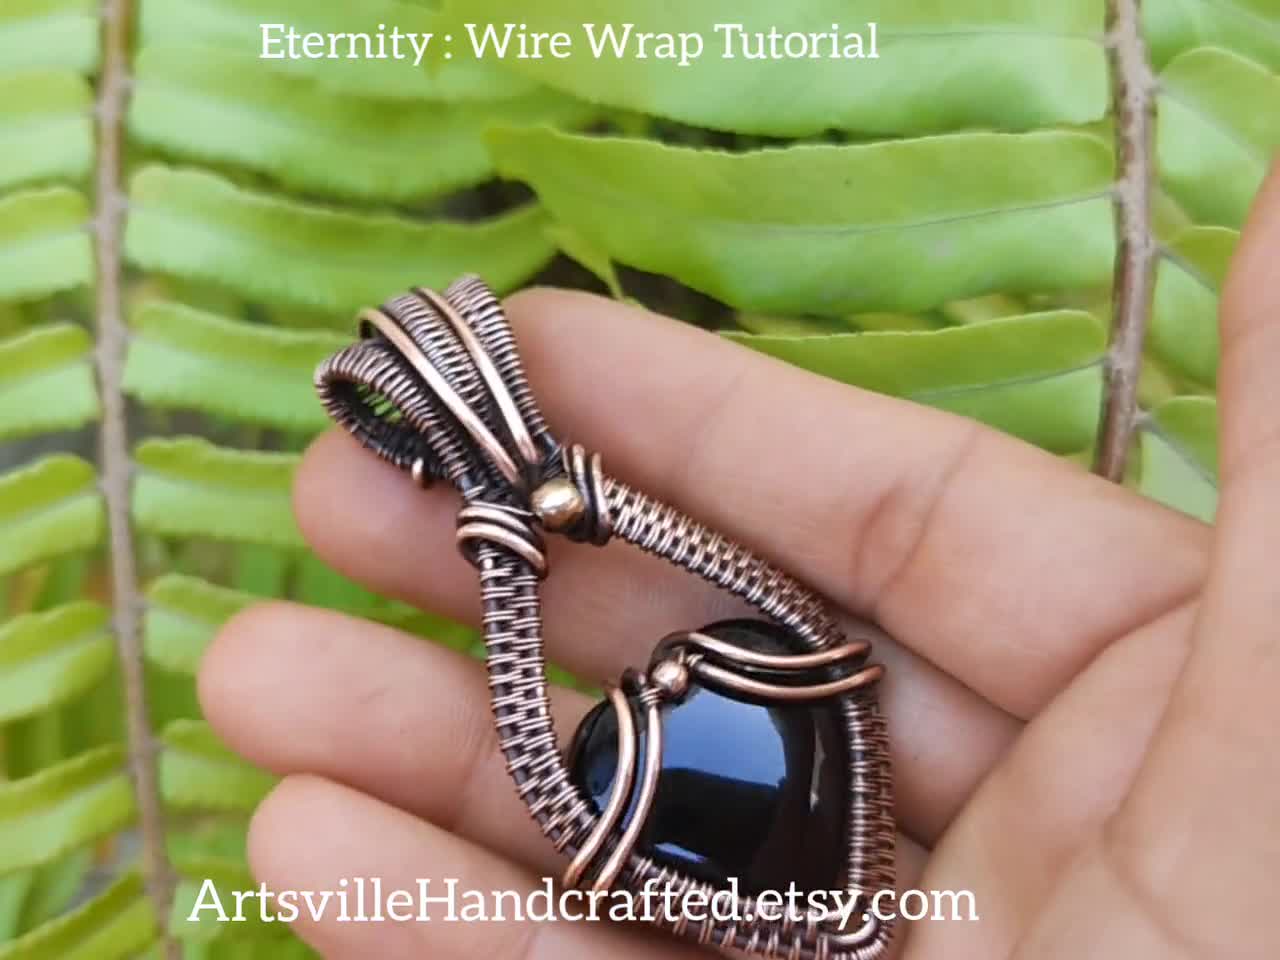 How To Make Jewelry: Find Out Wire Wrapping And Laying Stones